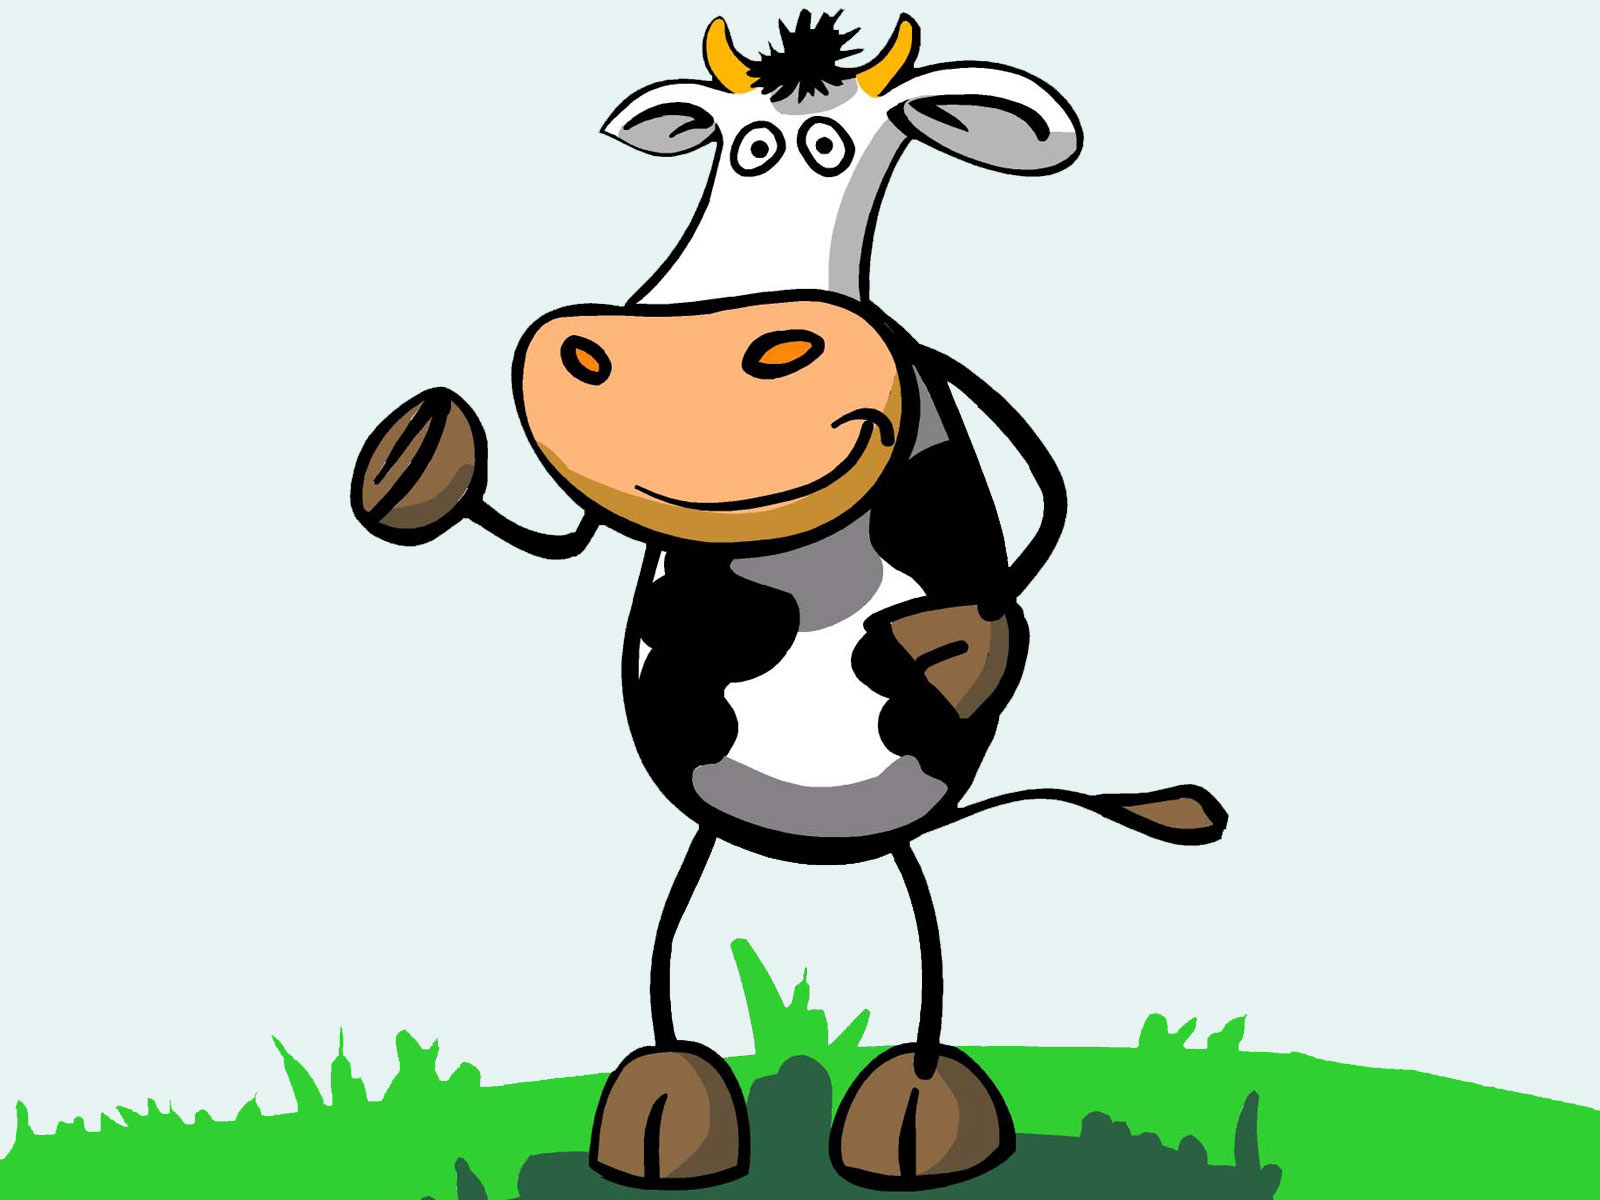 Funny Cows Cartoon Tattoo Pictures to Pin - ClipArt Best - ClipArt ...